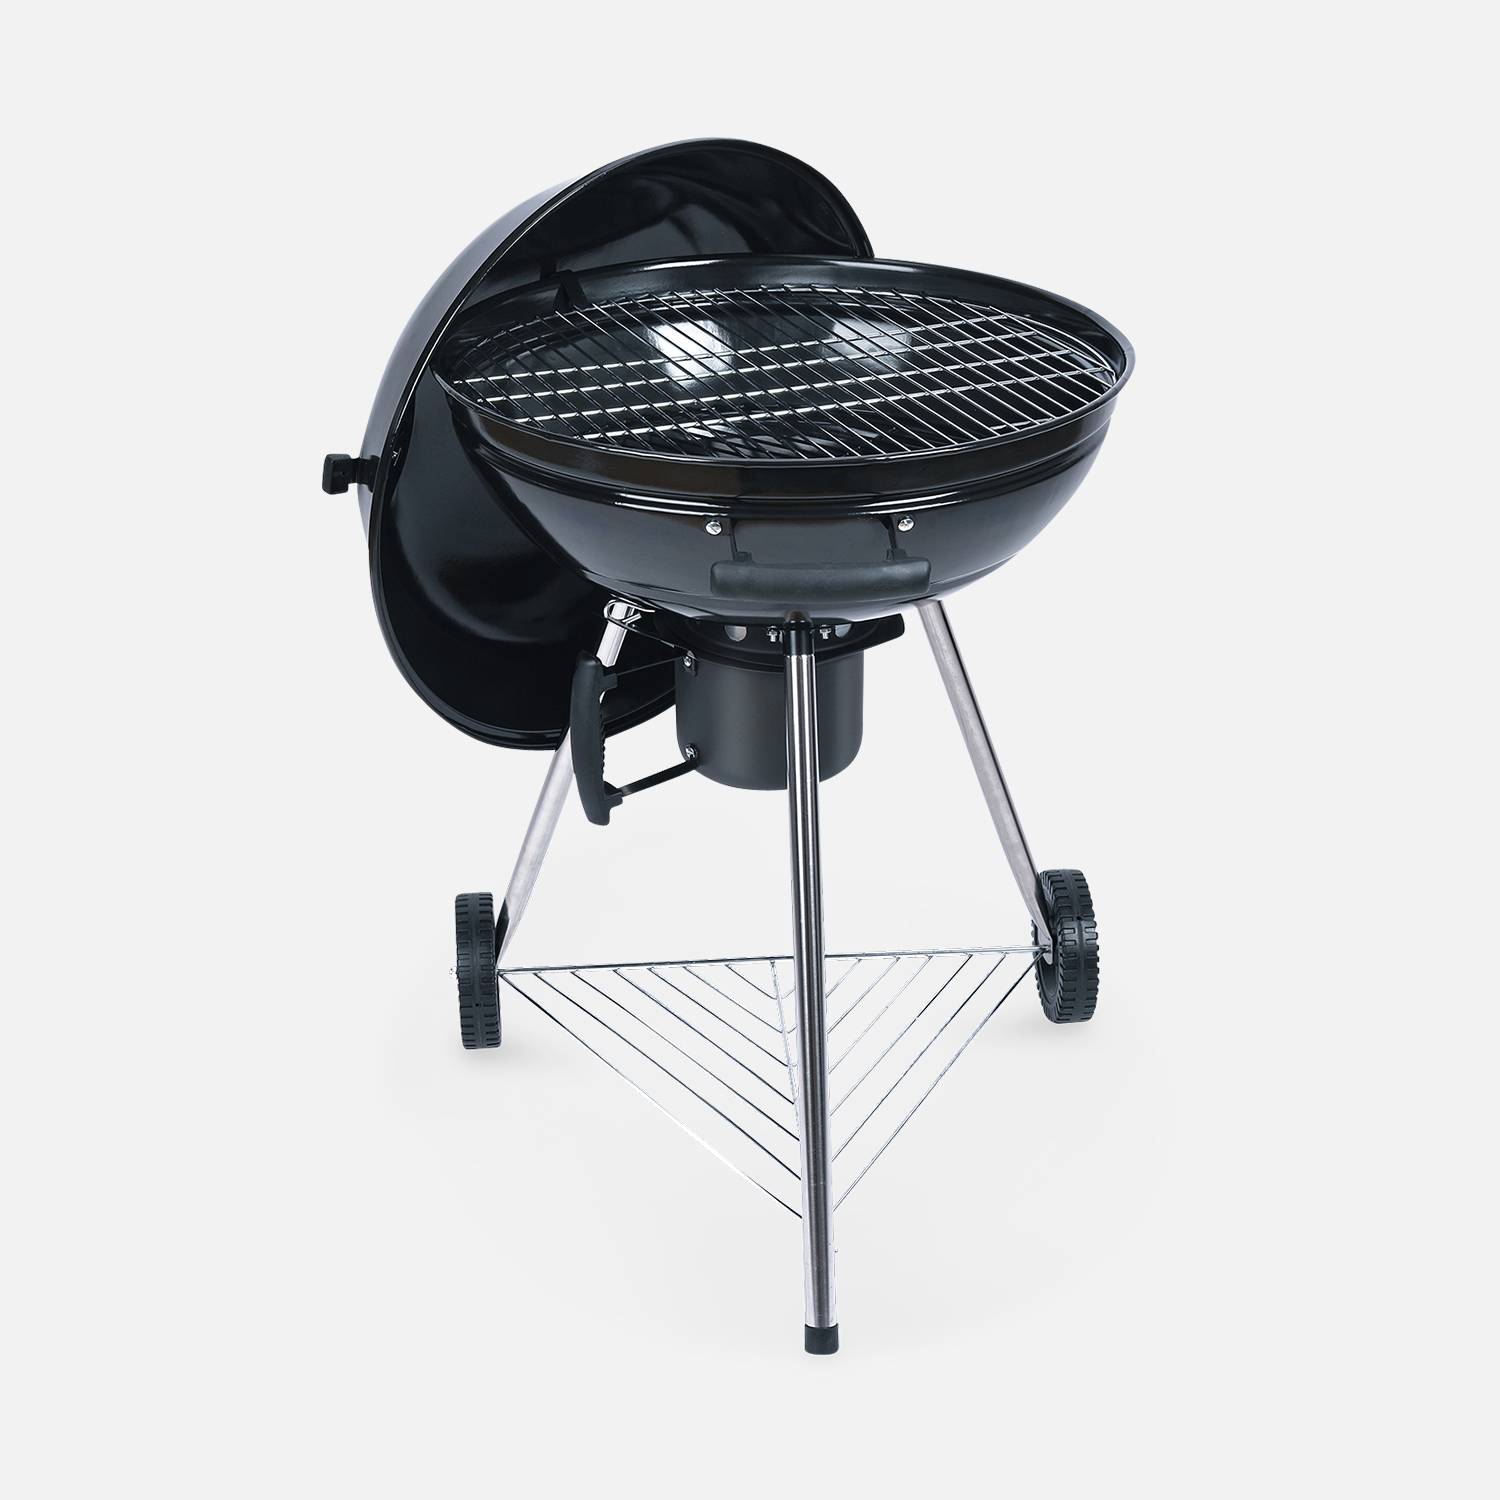 Large charcoal kettle barbecue, 64x62x98cm - Georges,sweeek,Photo6